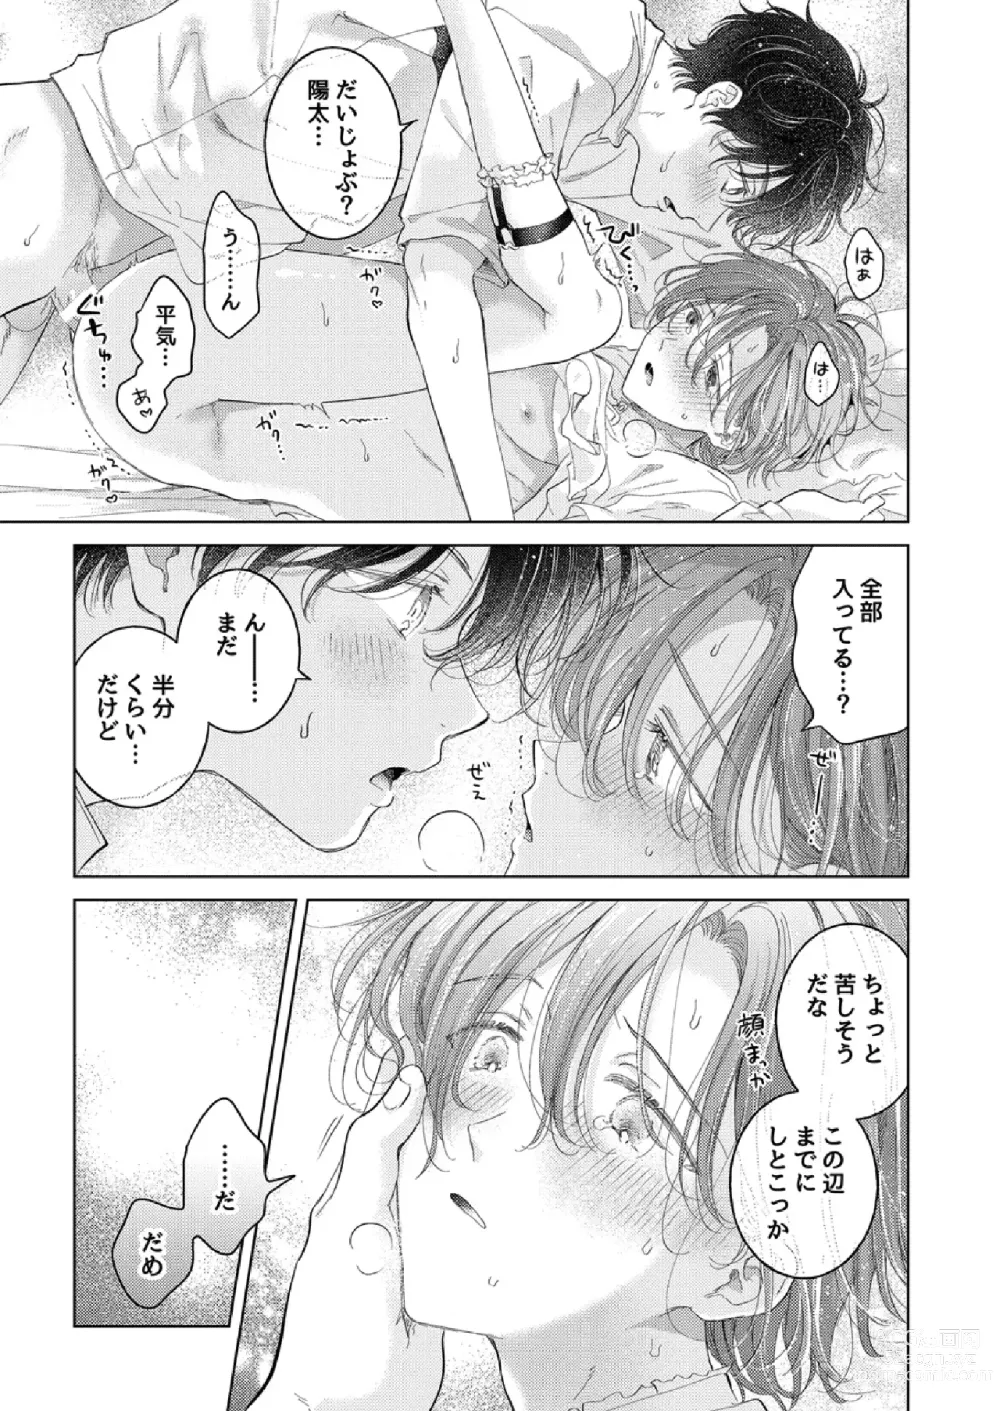 Page 25 of doujinshi How to use Gender-Changing Apps Properly 2